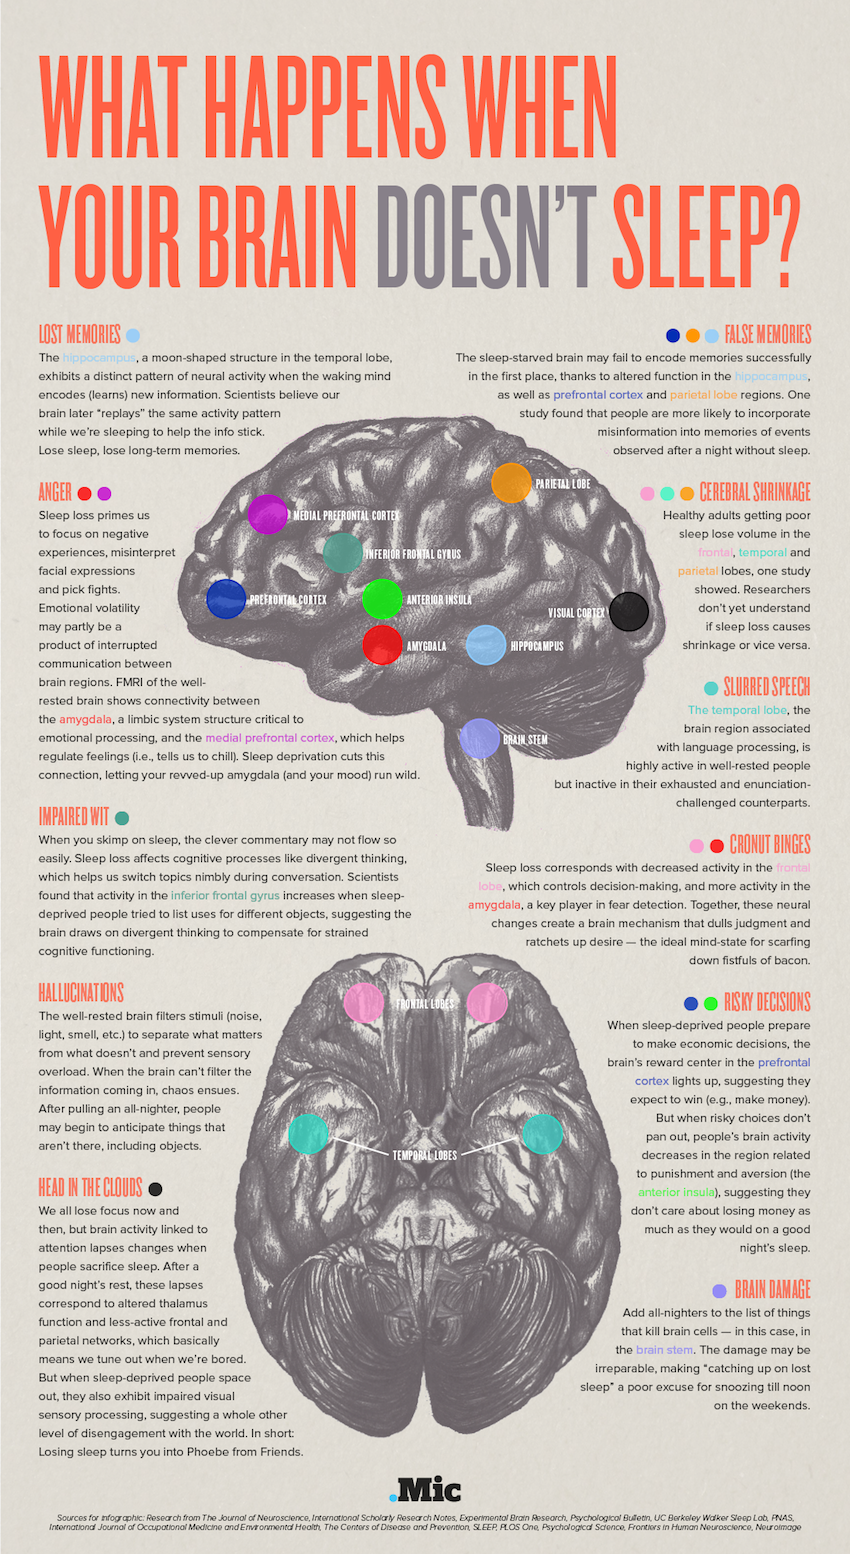 what happens when your brain doesn't sleep?, infographic